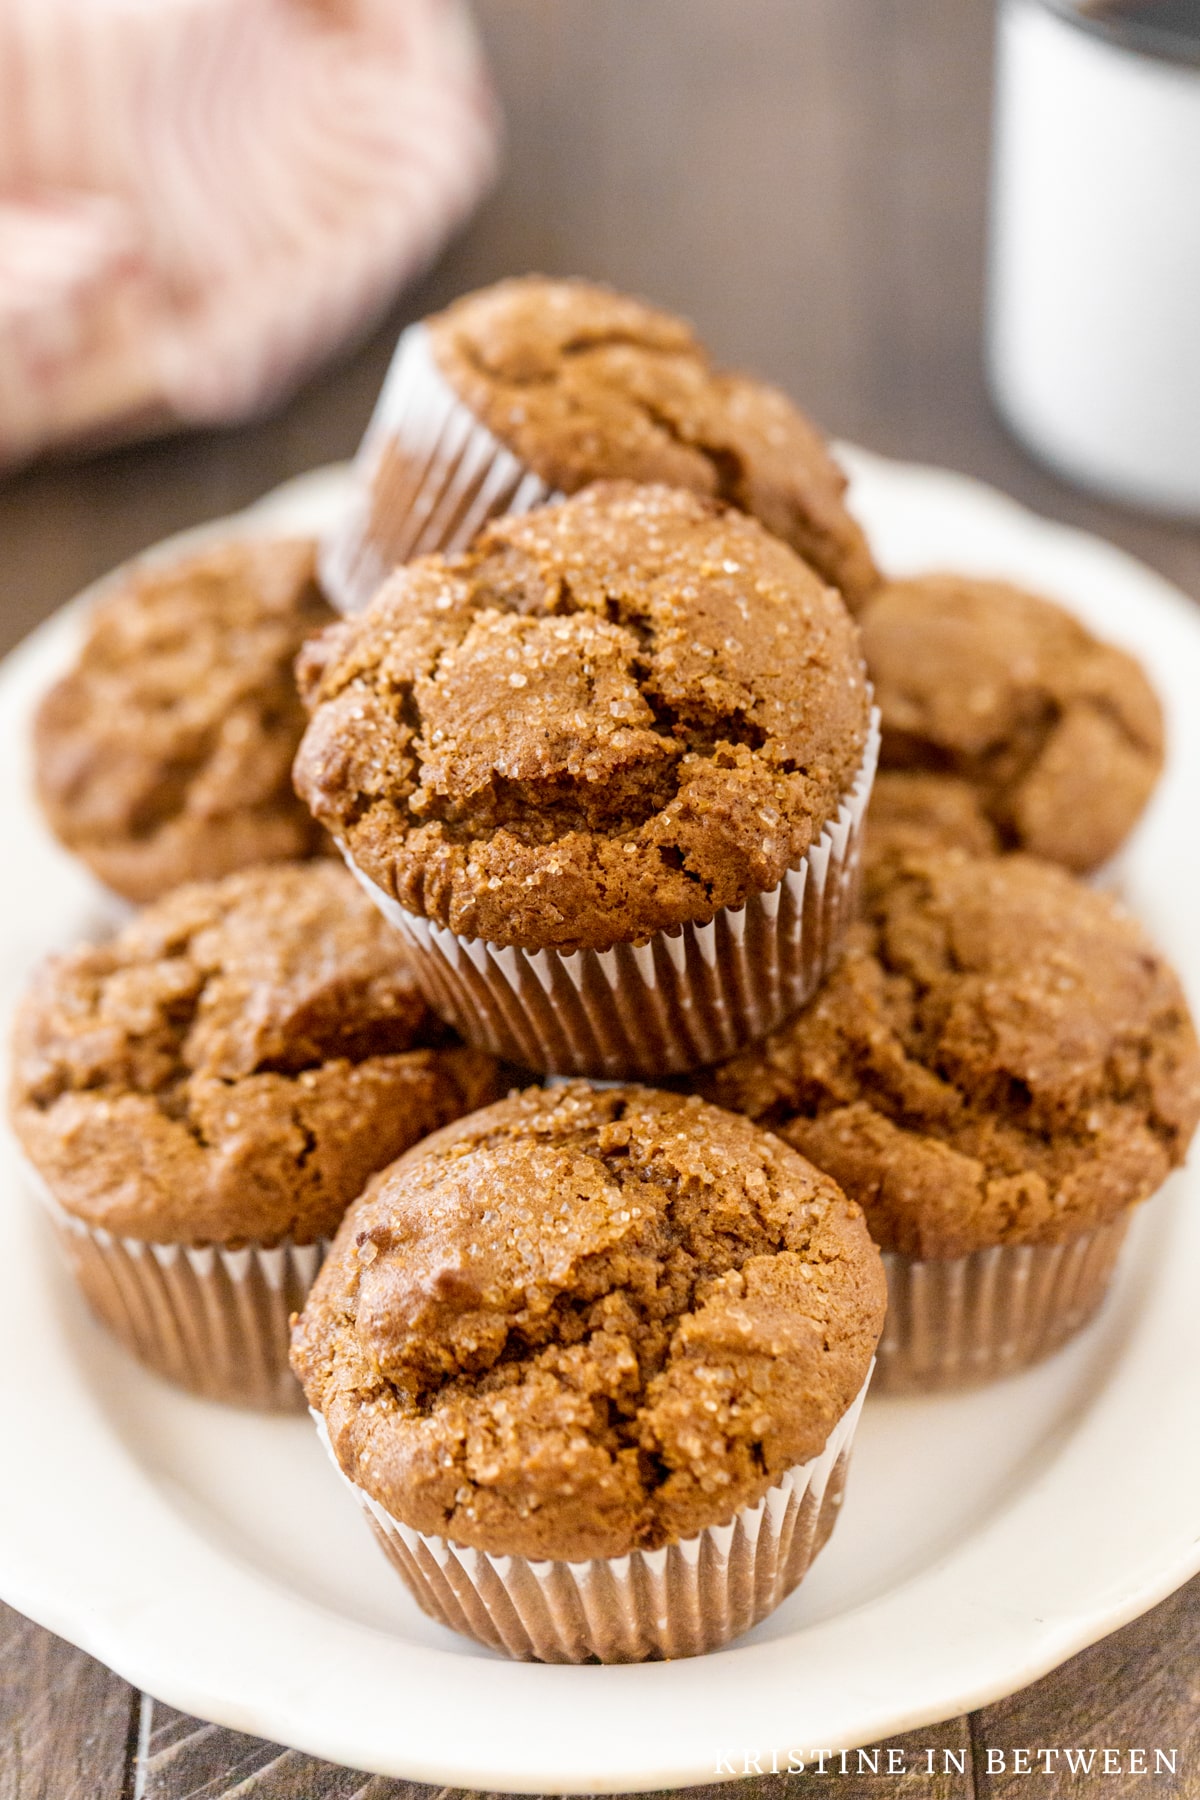 A muffin plate full of gingerbread muffins with a cup of coffee in the background.